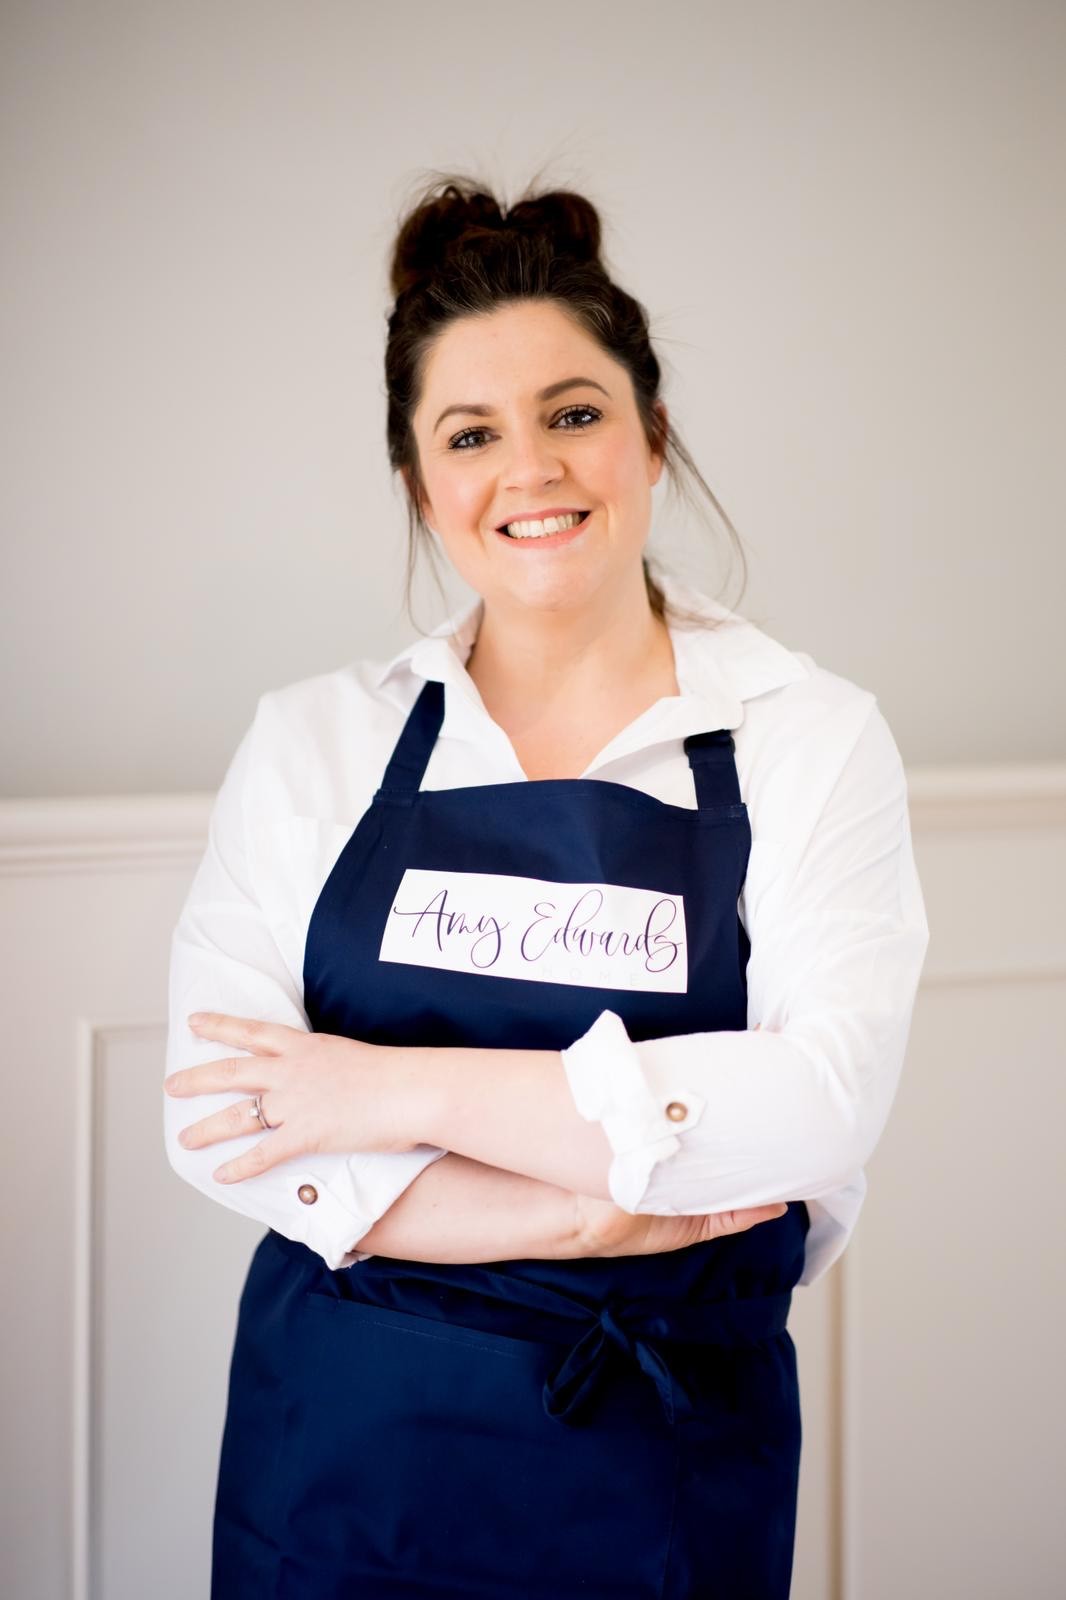 Amy Edwards cross armed smiling at the camera. Wearing a white shirt and navy painting apron.